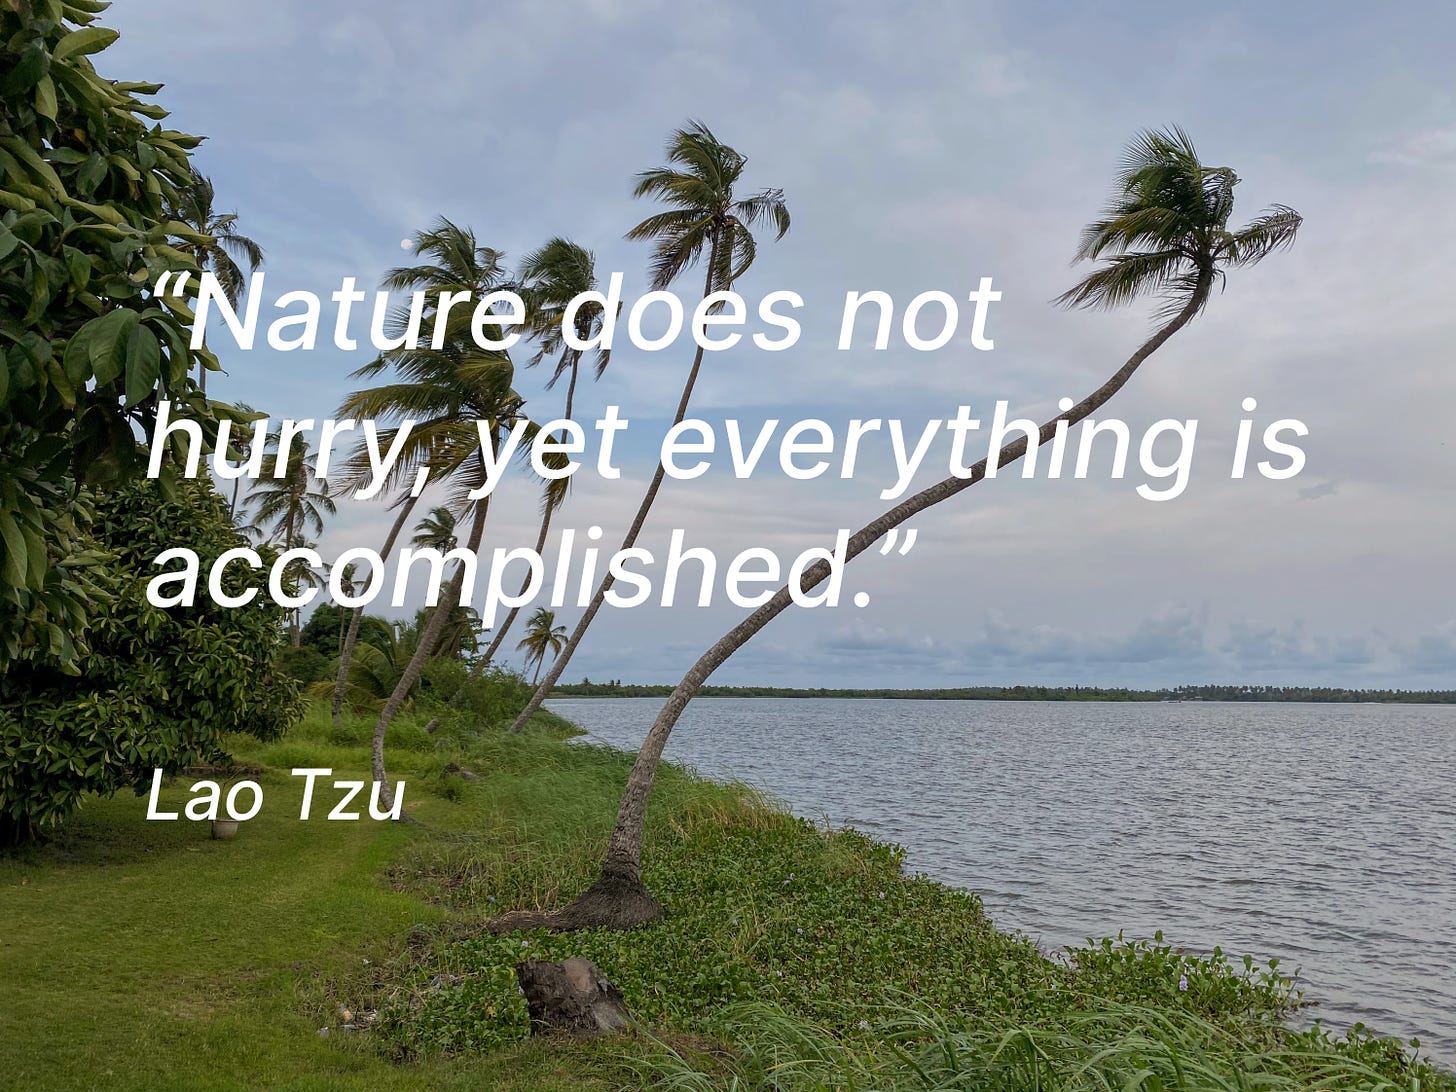 A quote picture saying "Nature does not hurry, yet everything is accomplished."